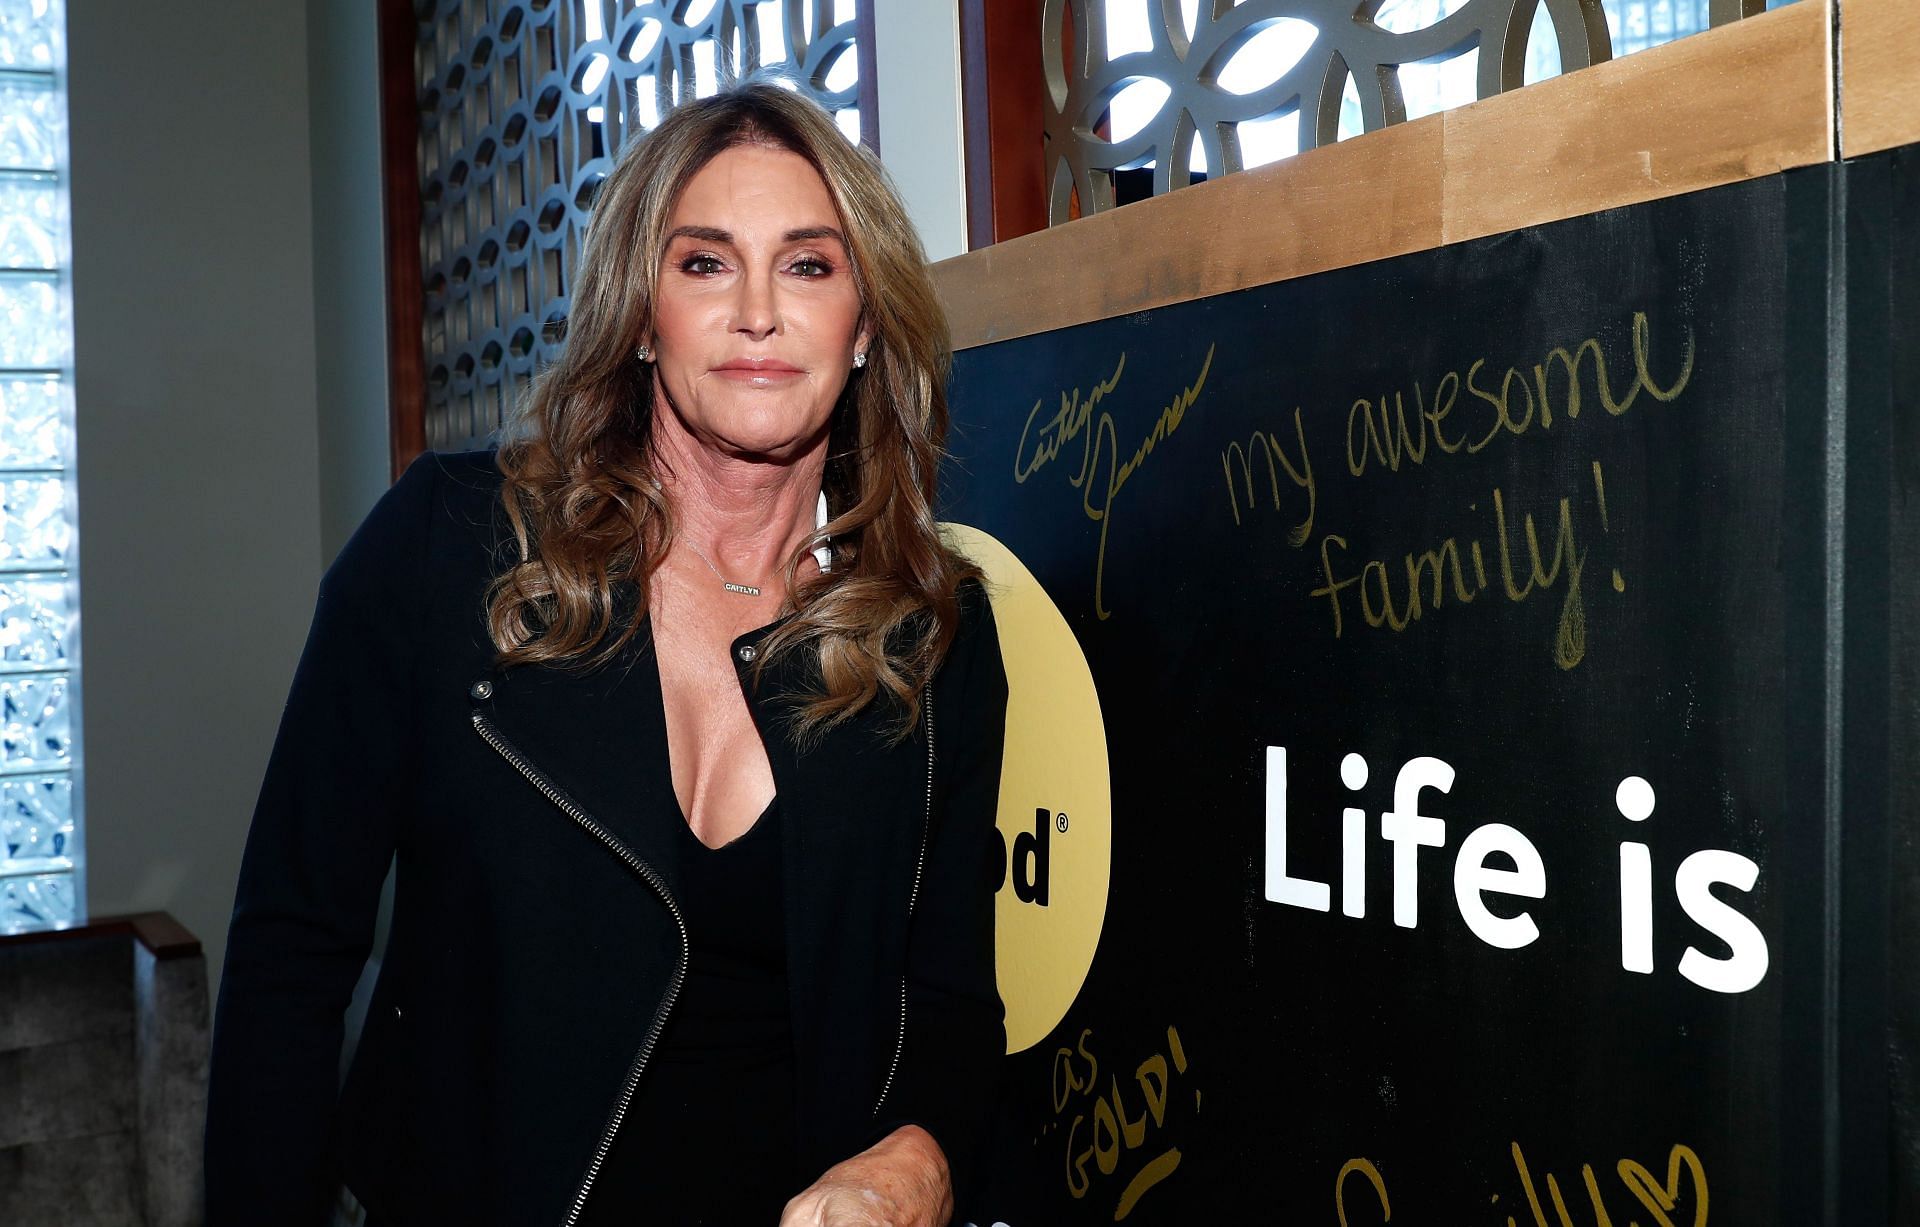 Caitlyn Jenner at the Life is Good at GOLD MEETS GOLDEN Event in Los Angeles